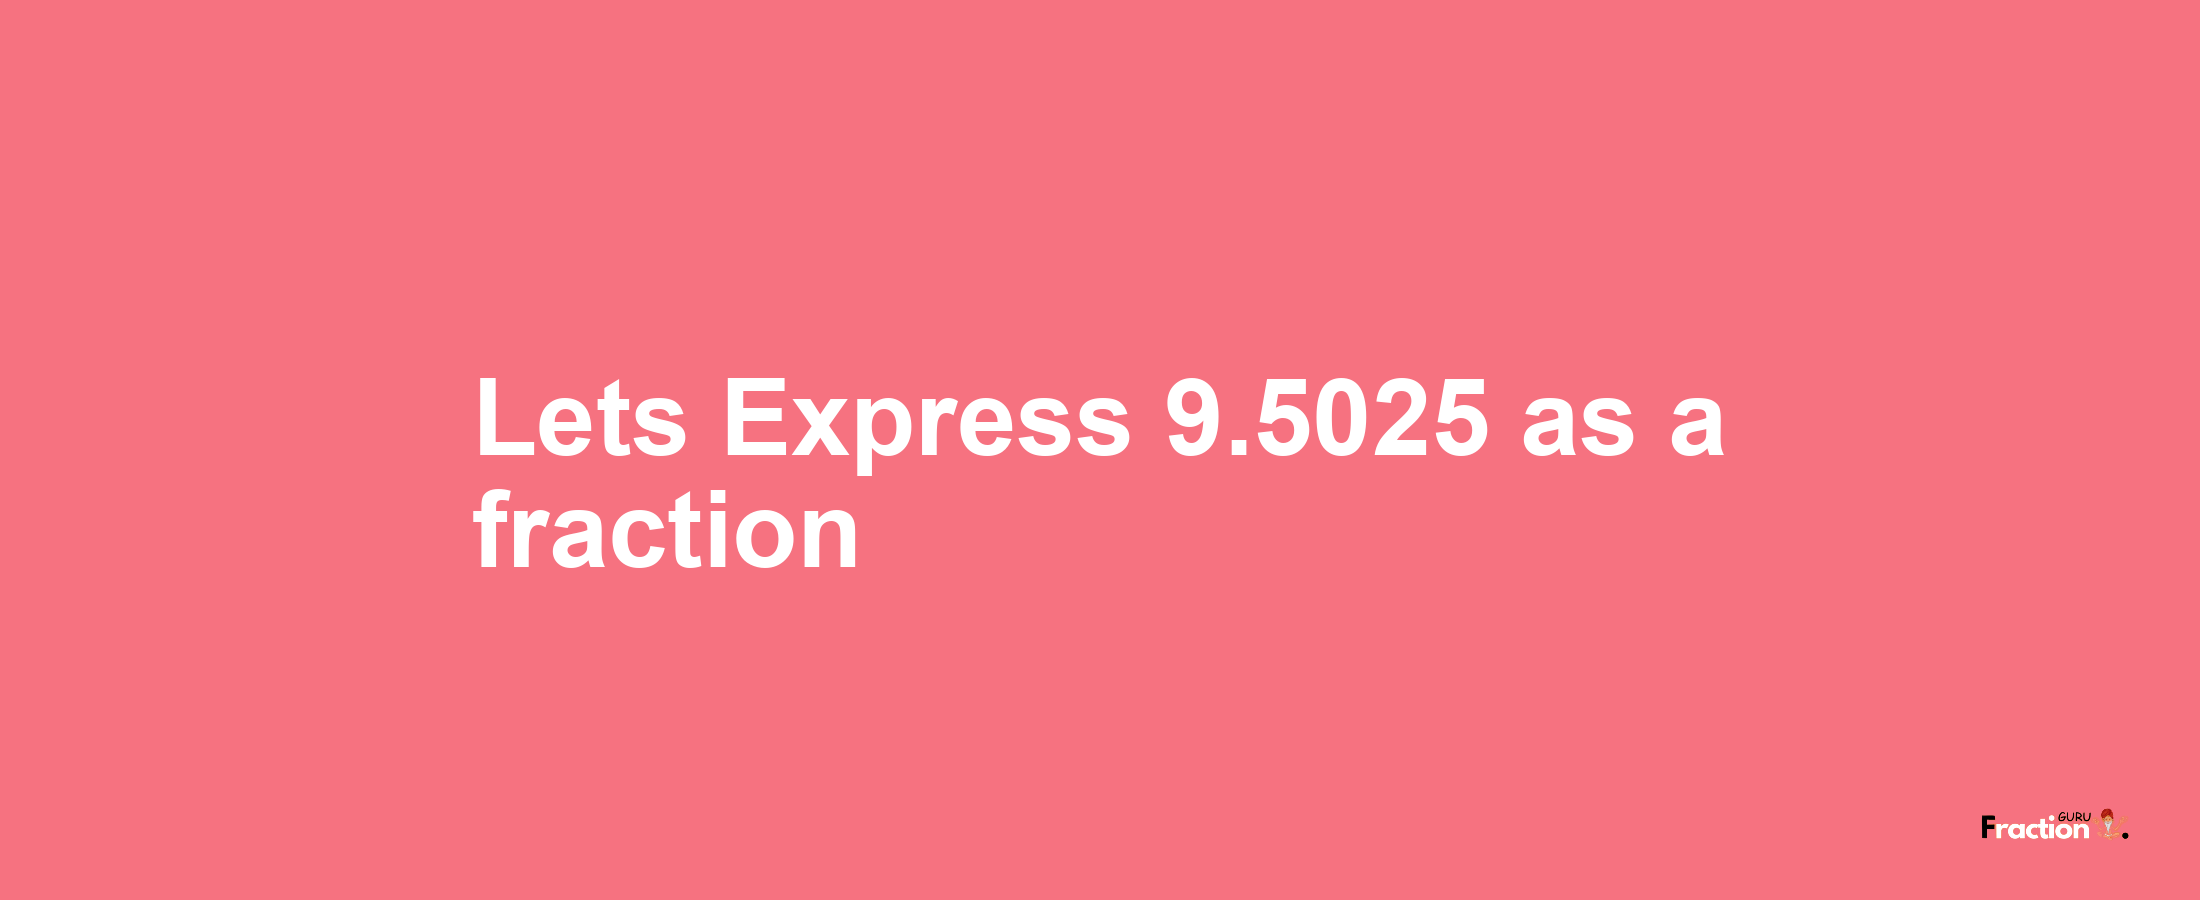 Lets Express 9.5025 as afraction